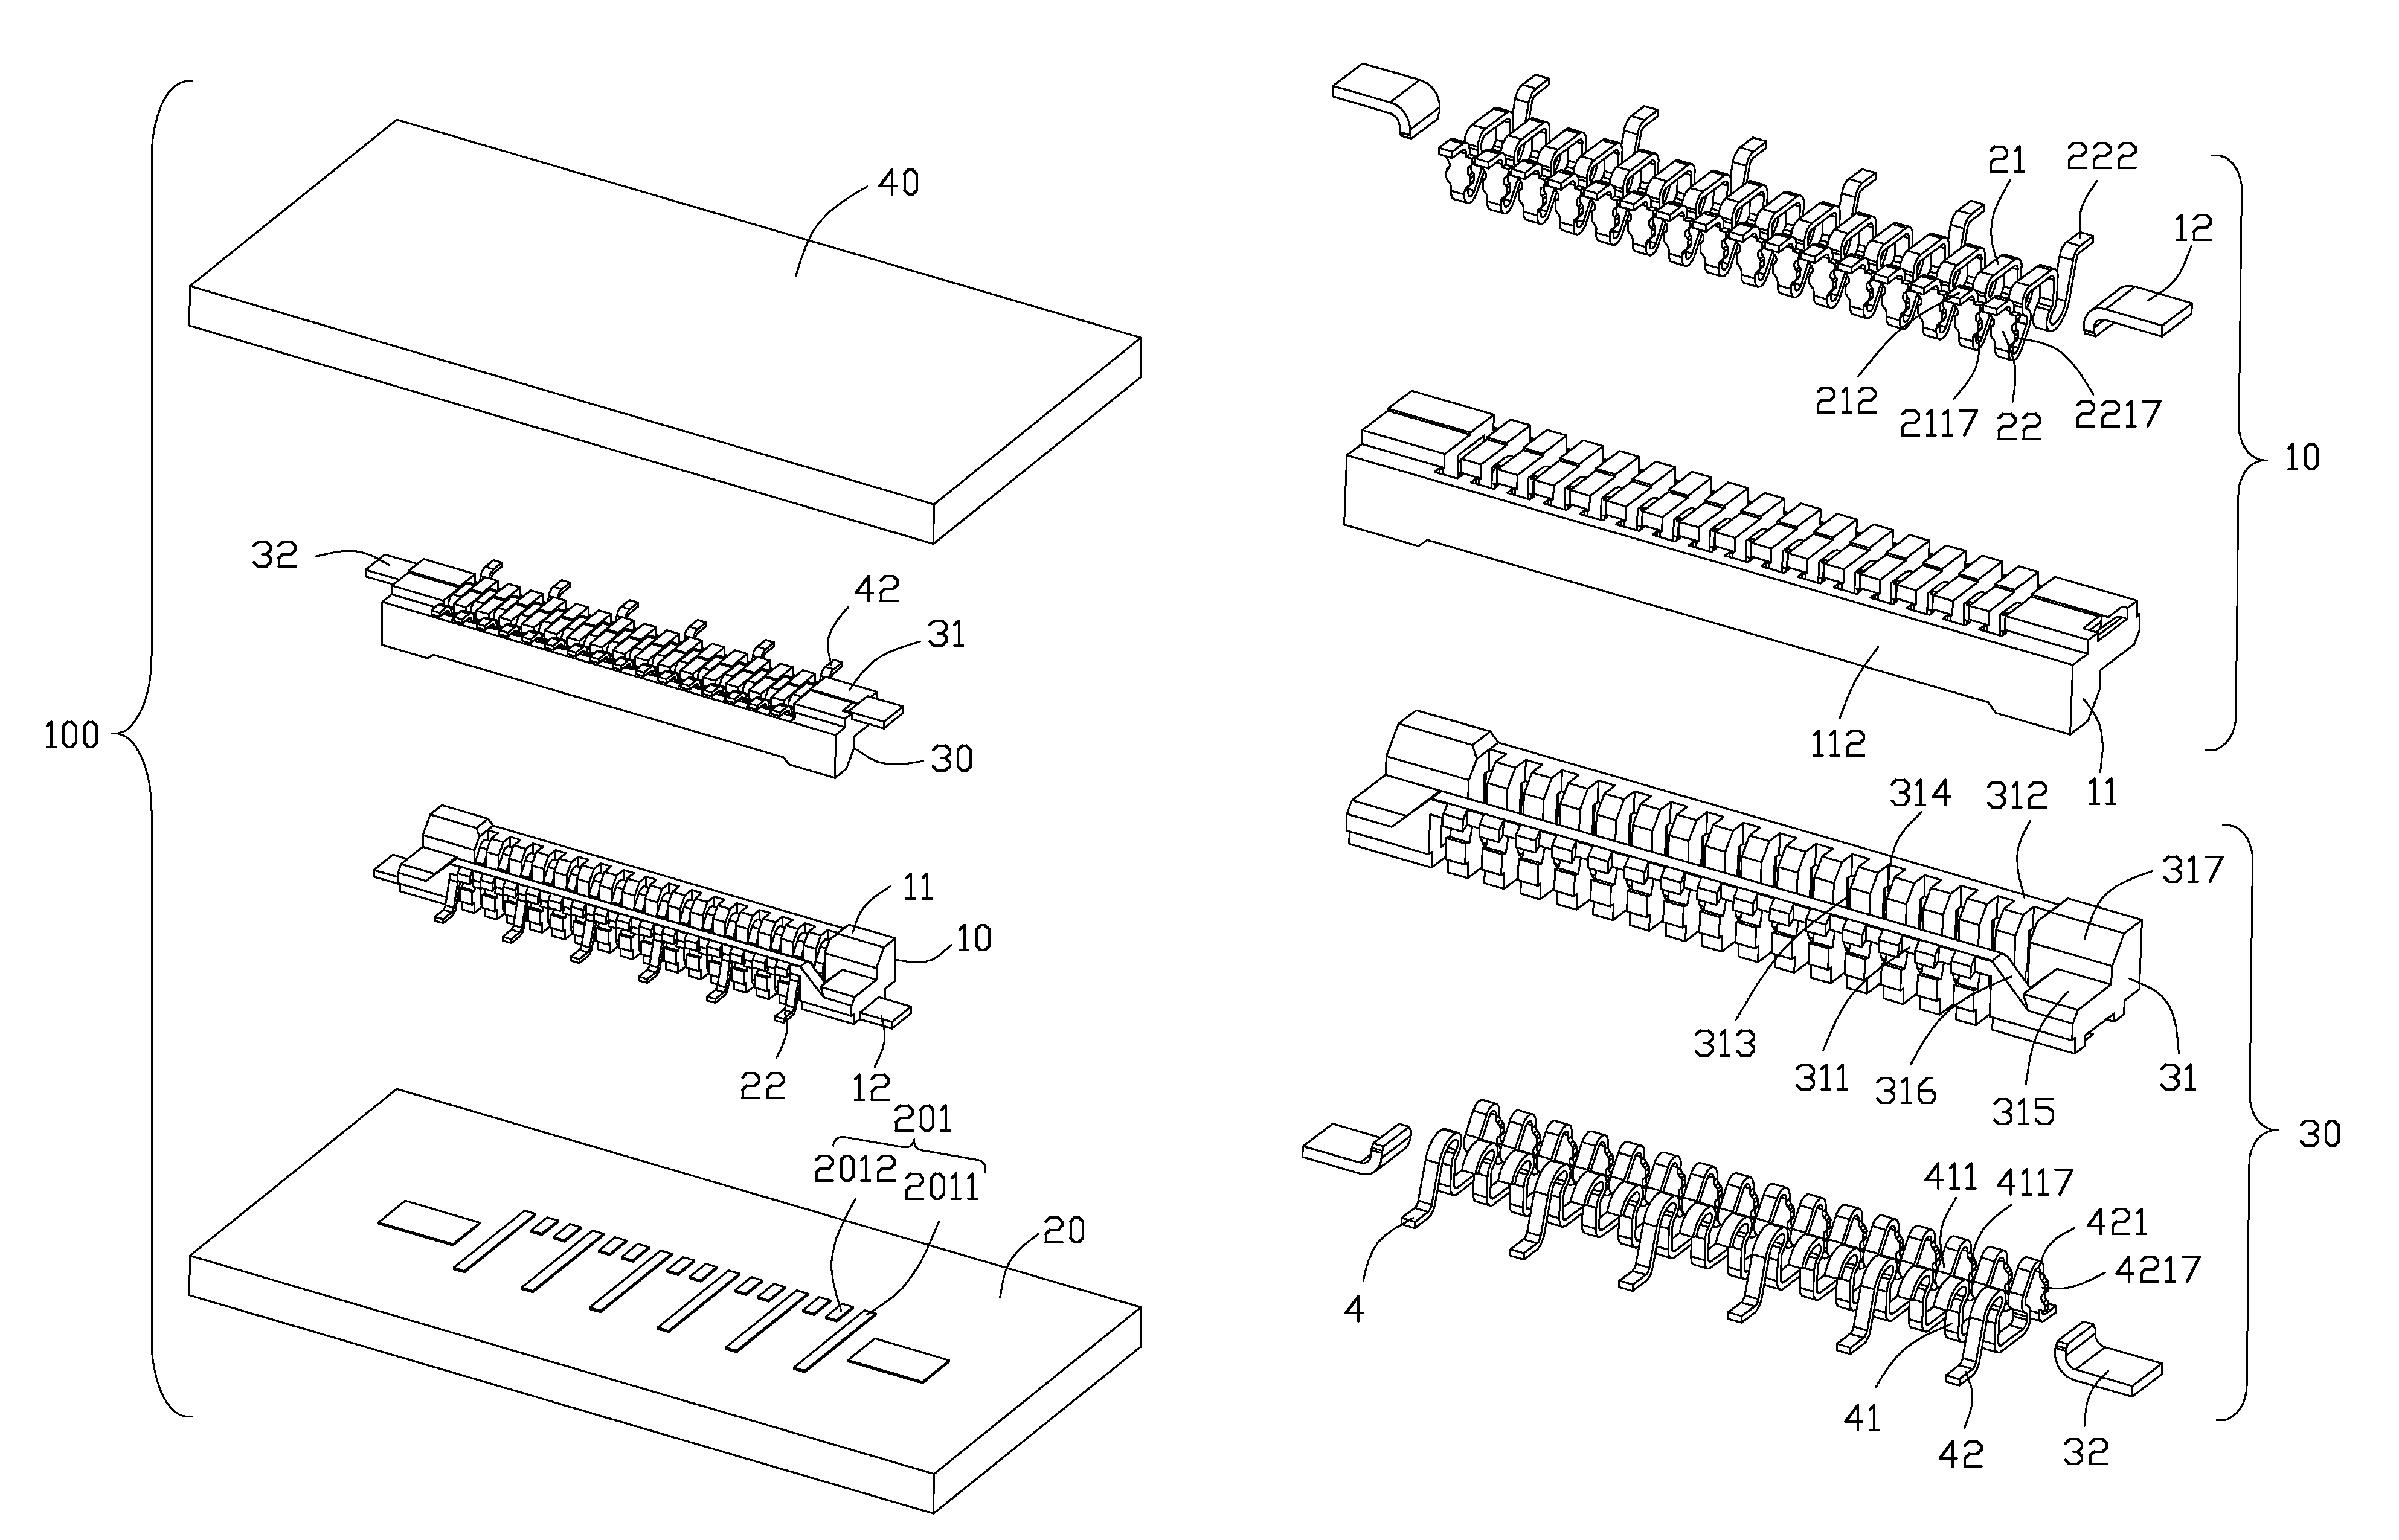 Board to board connector assembly having improved terminal arrangement